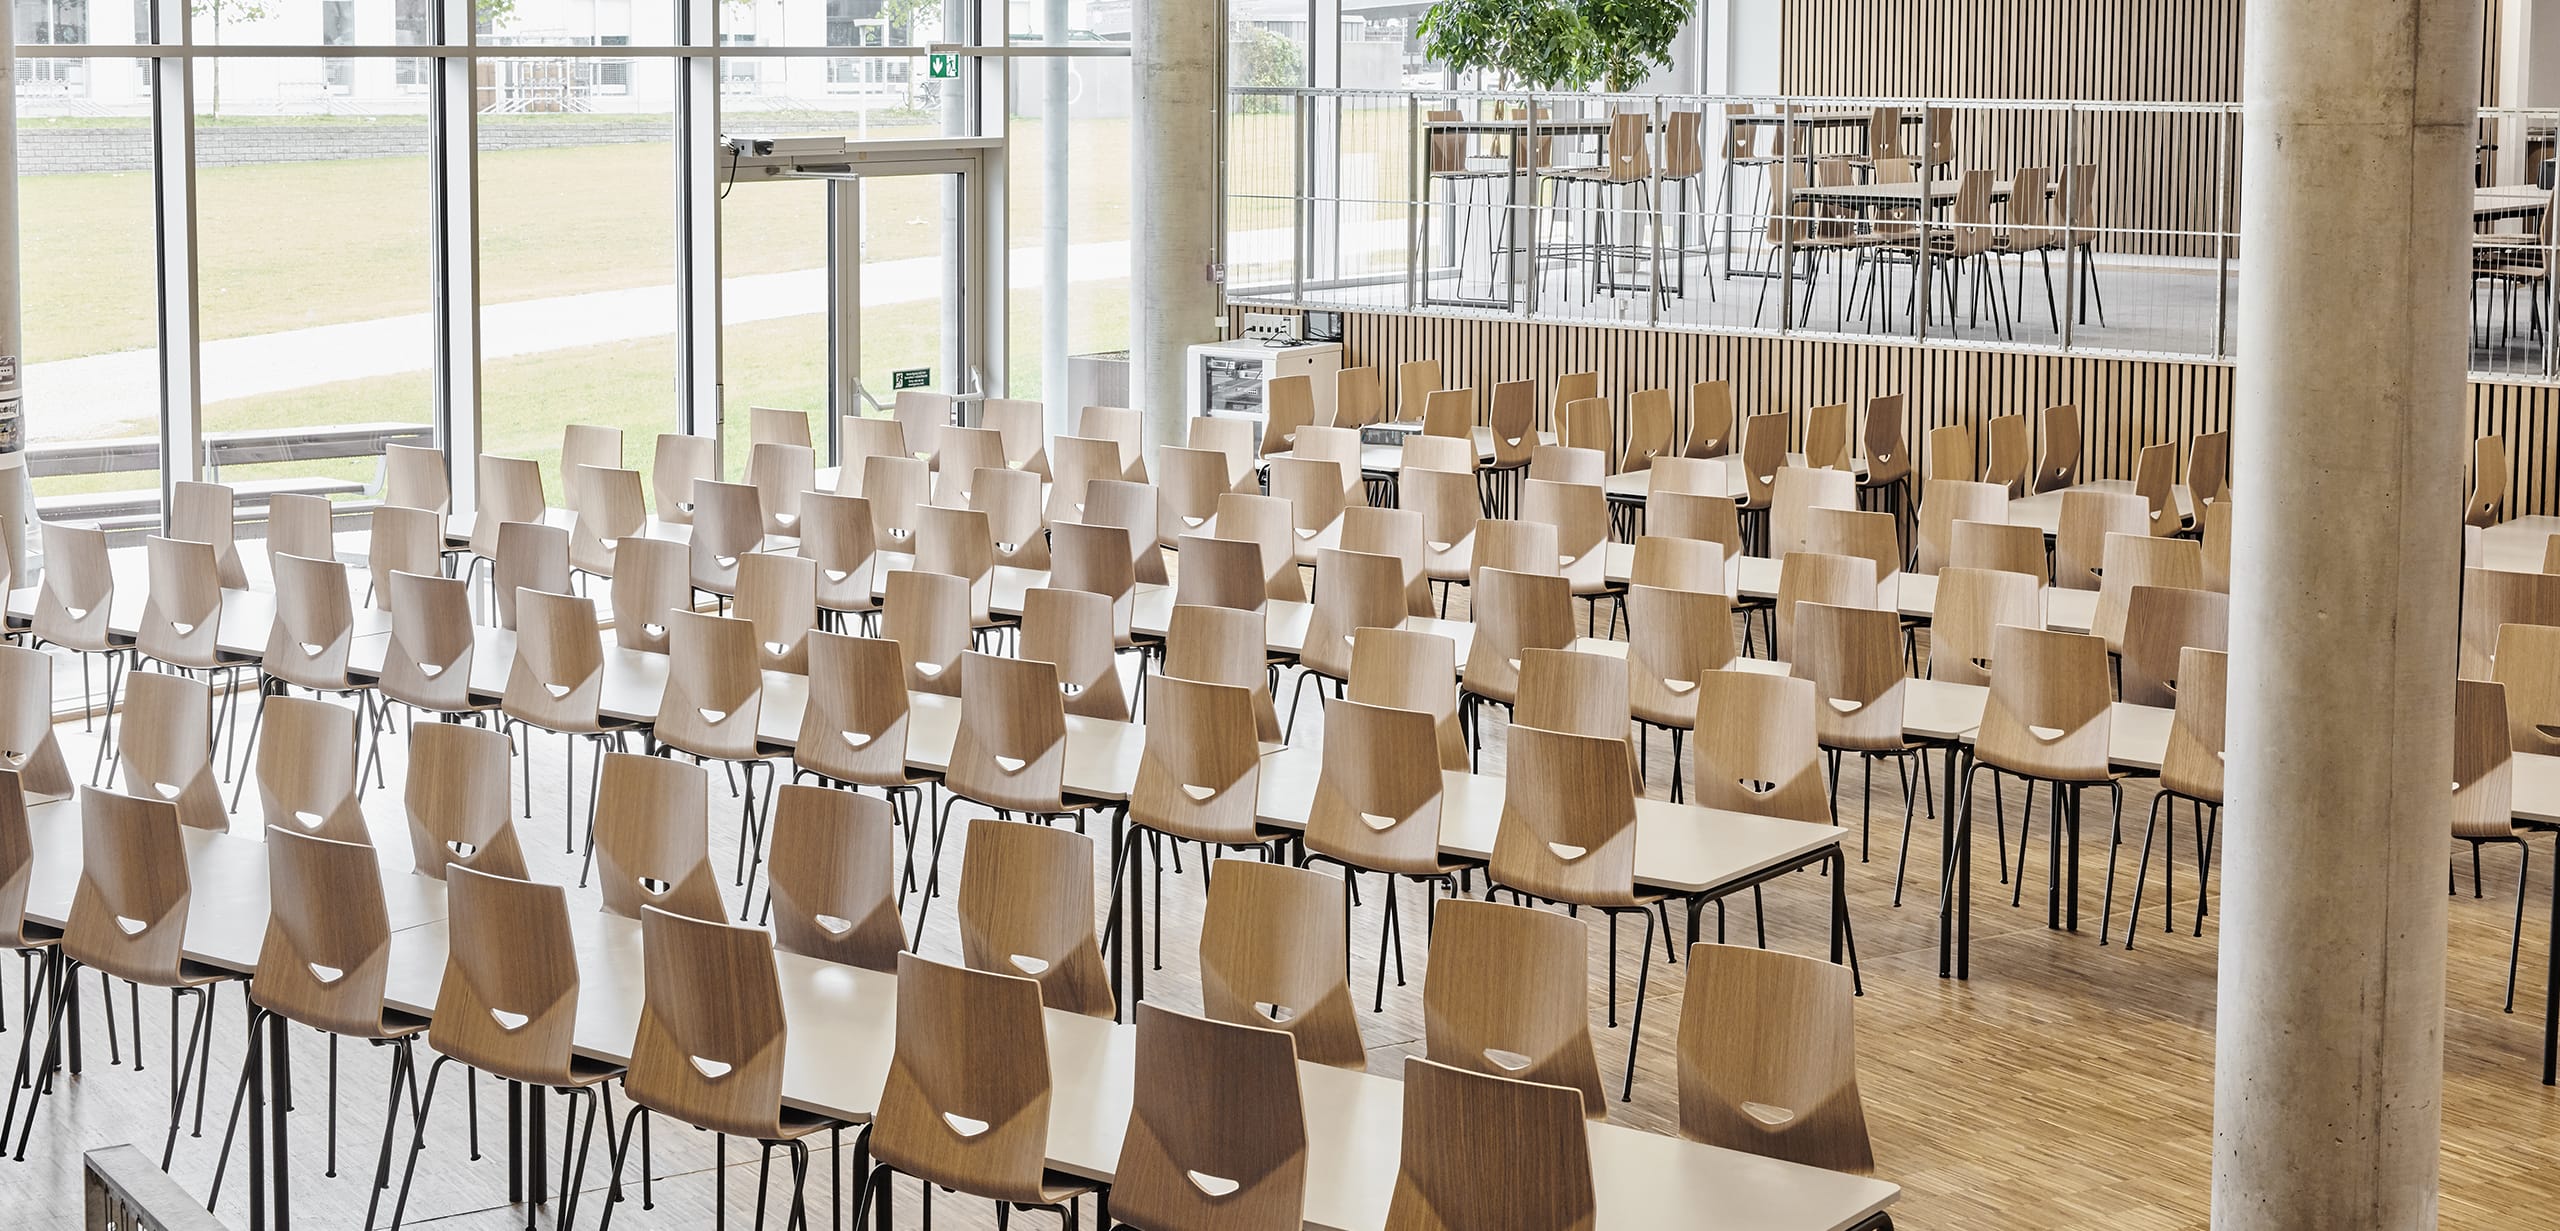 A large conference room with rows of wooden chairs.